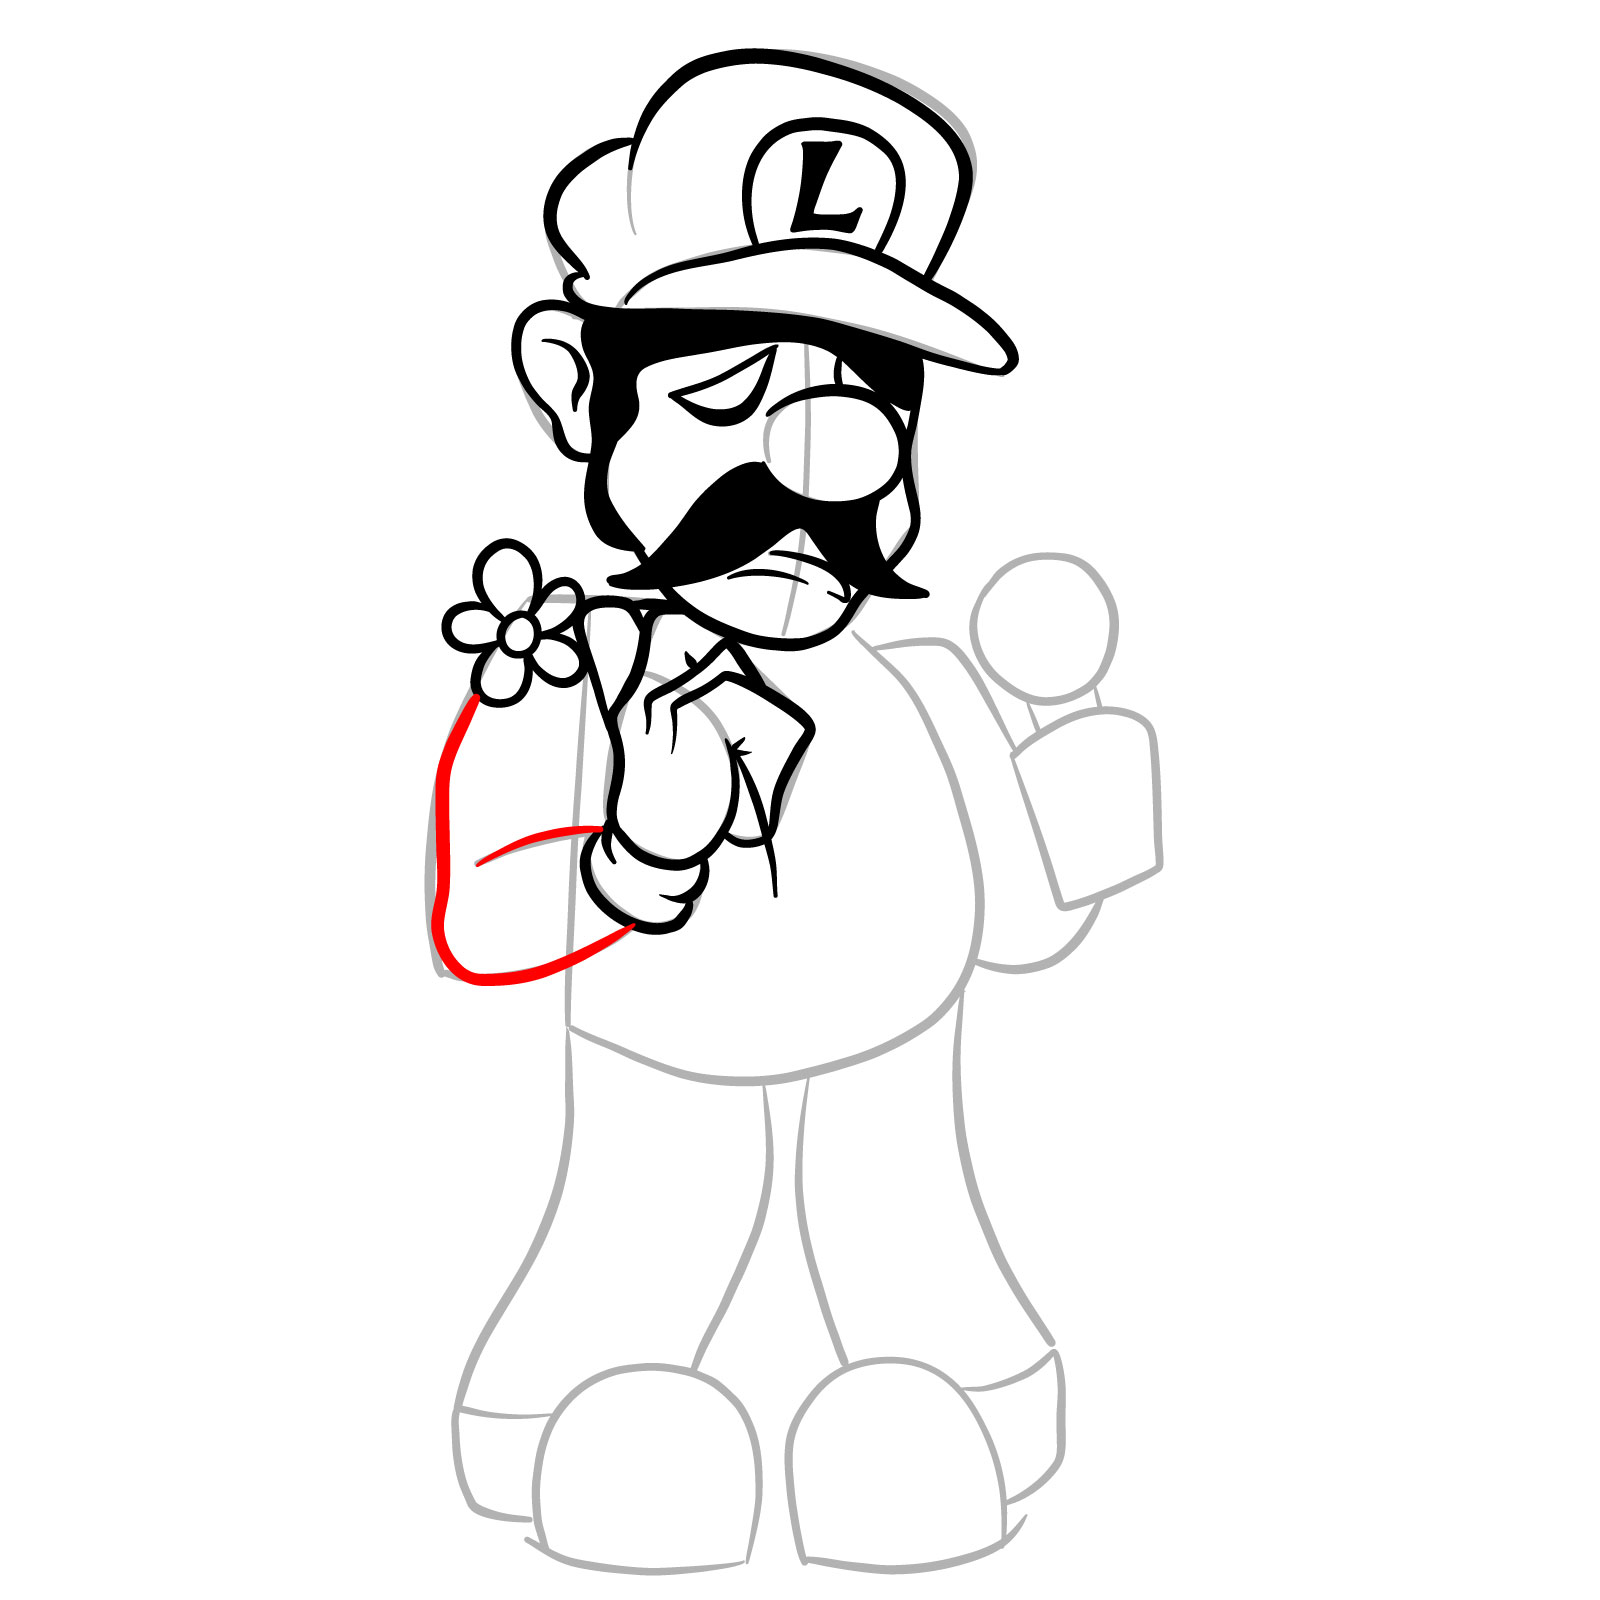 How to draw Beta Luigi from FNF - step 19